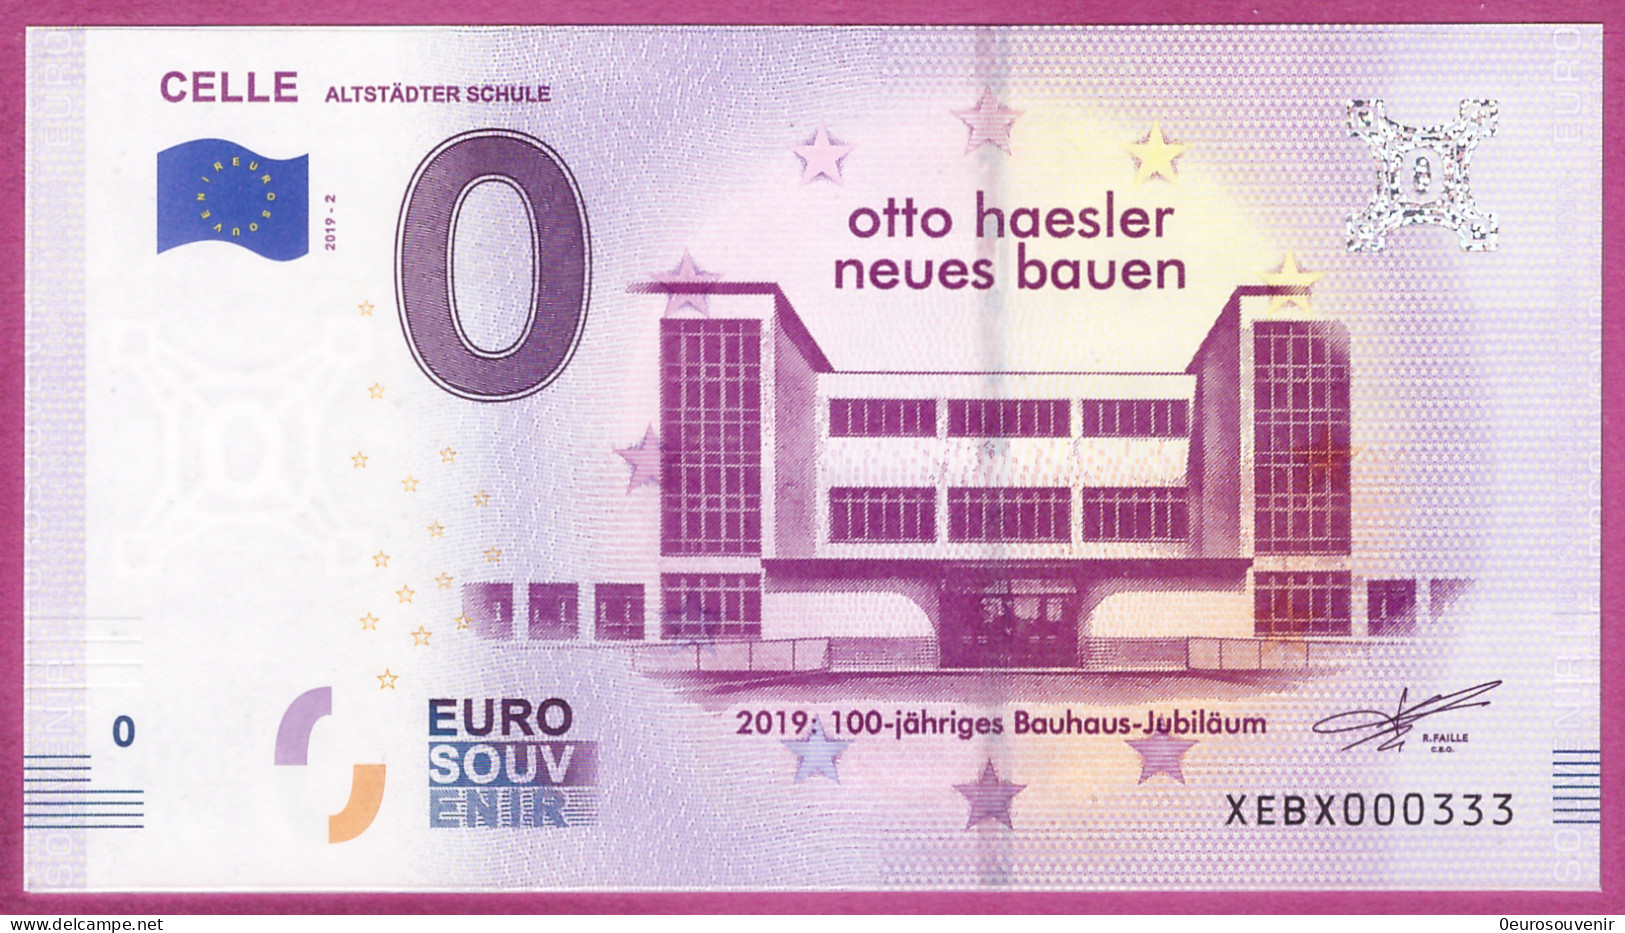 0-Euro XEBX 2019-2 # 333 ! CELLE - ALTSTÄDTER SCHULE - Private Proofs / Unofficial